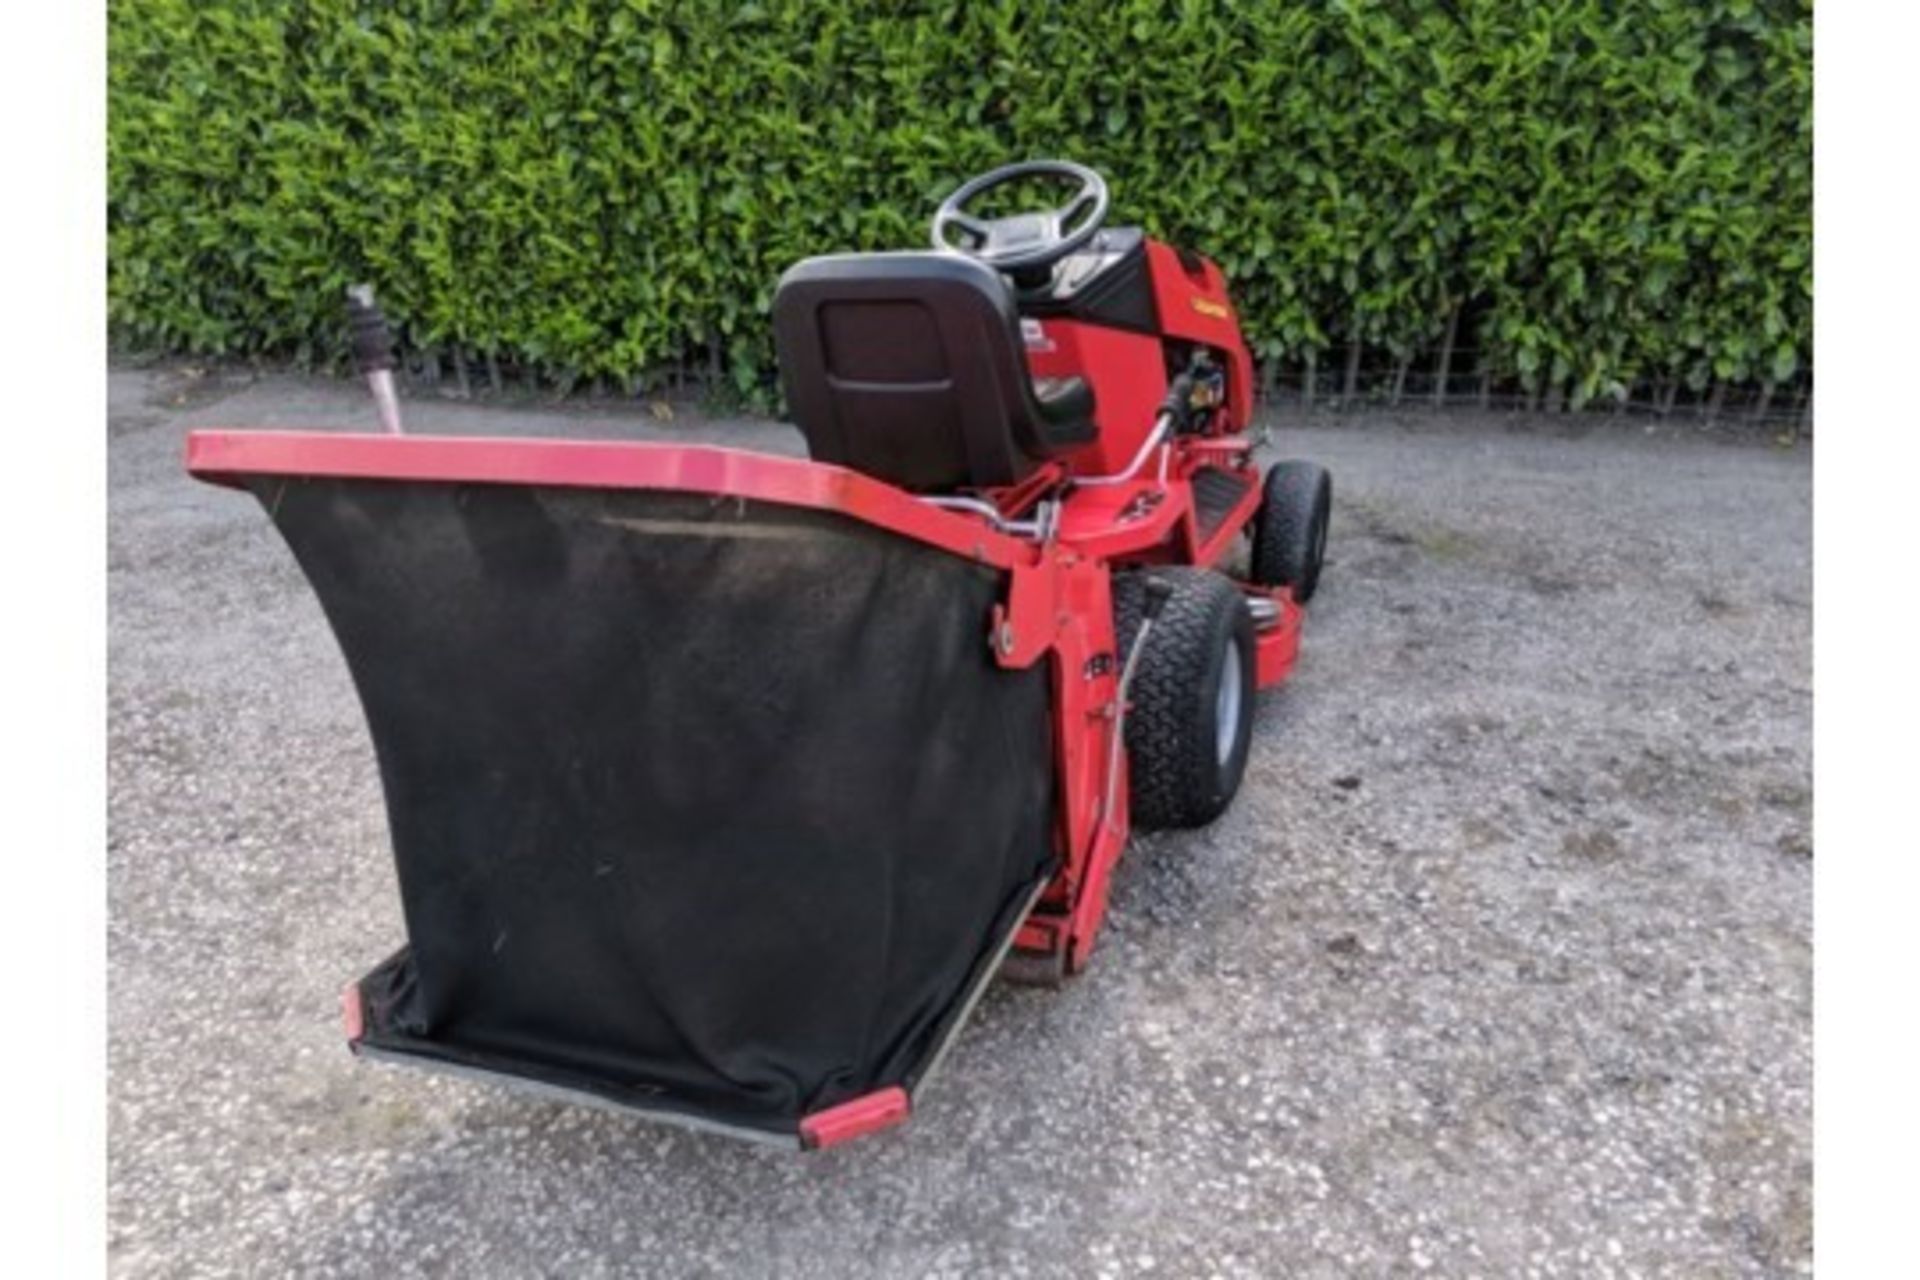 Countax C400H 38" Rear Discharge Garden Tractor With PGC - Image 6 of 7